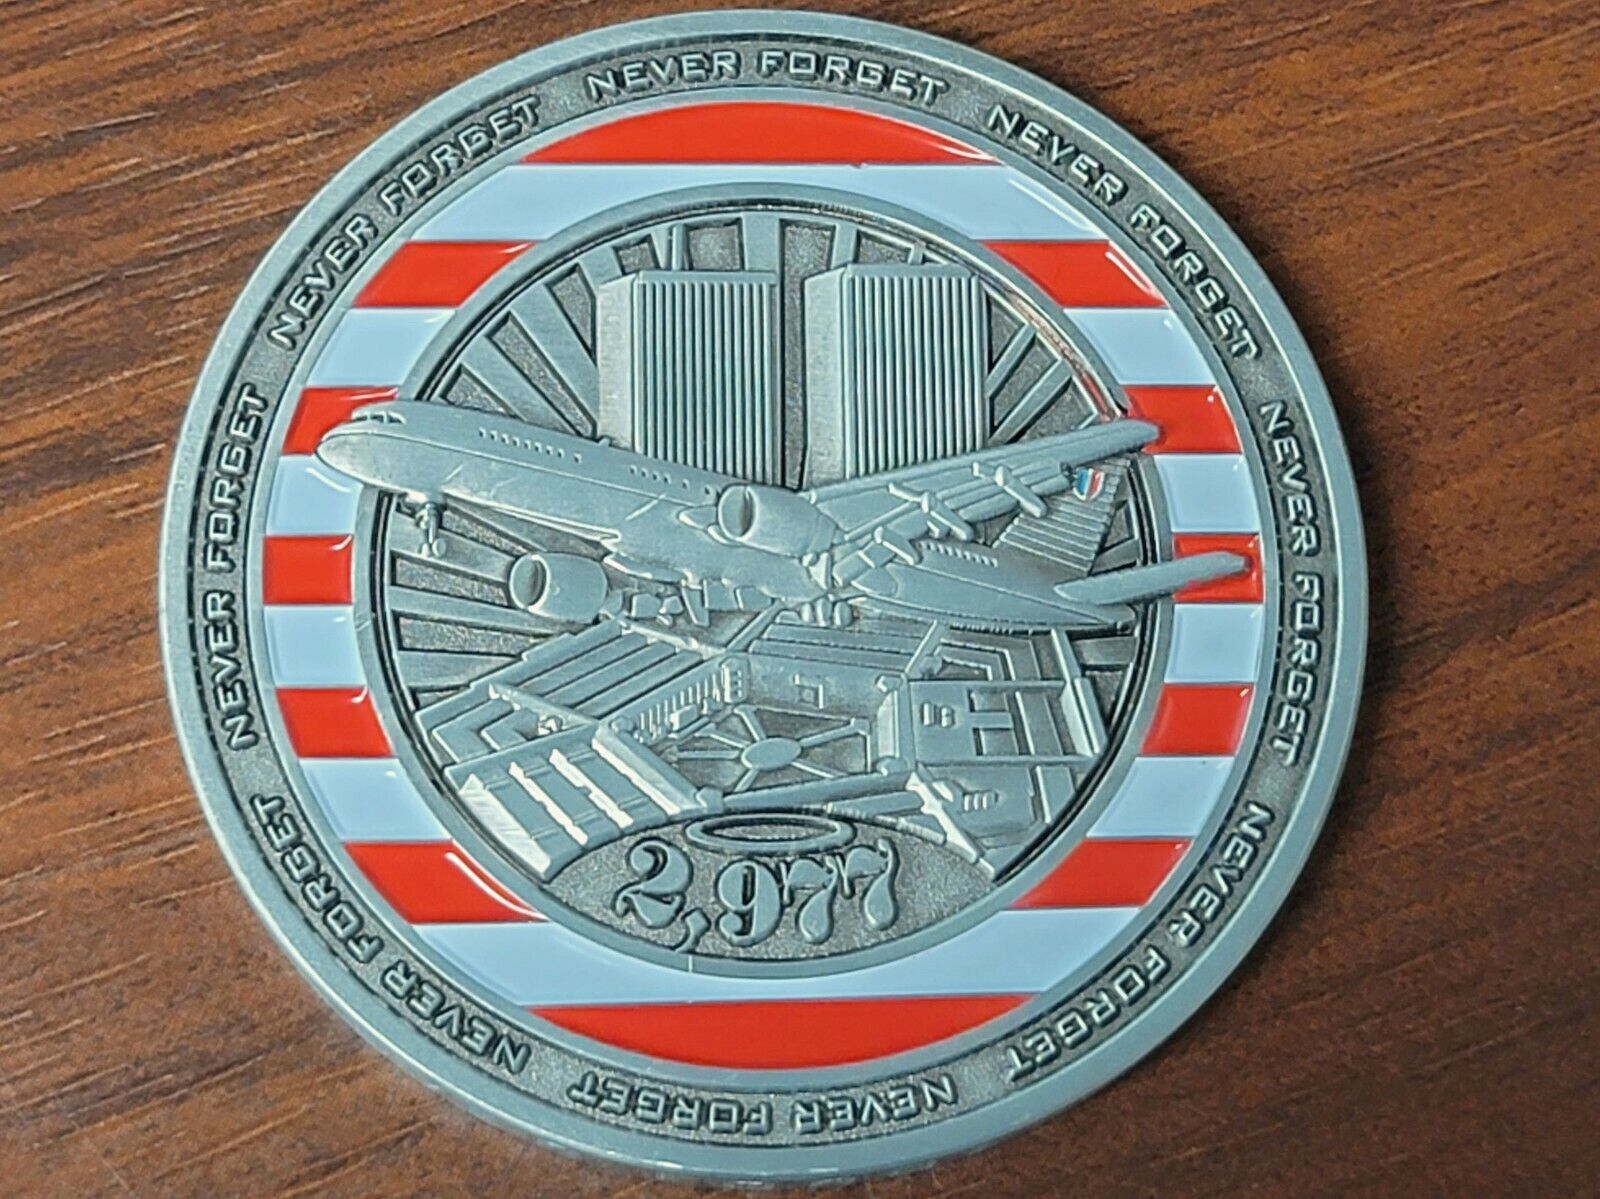 September 11th 20 Year Commemorative Challenge Coin - Never Forget